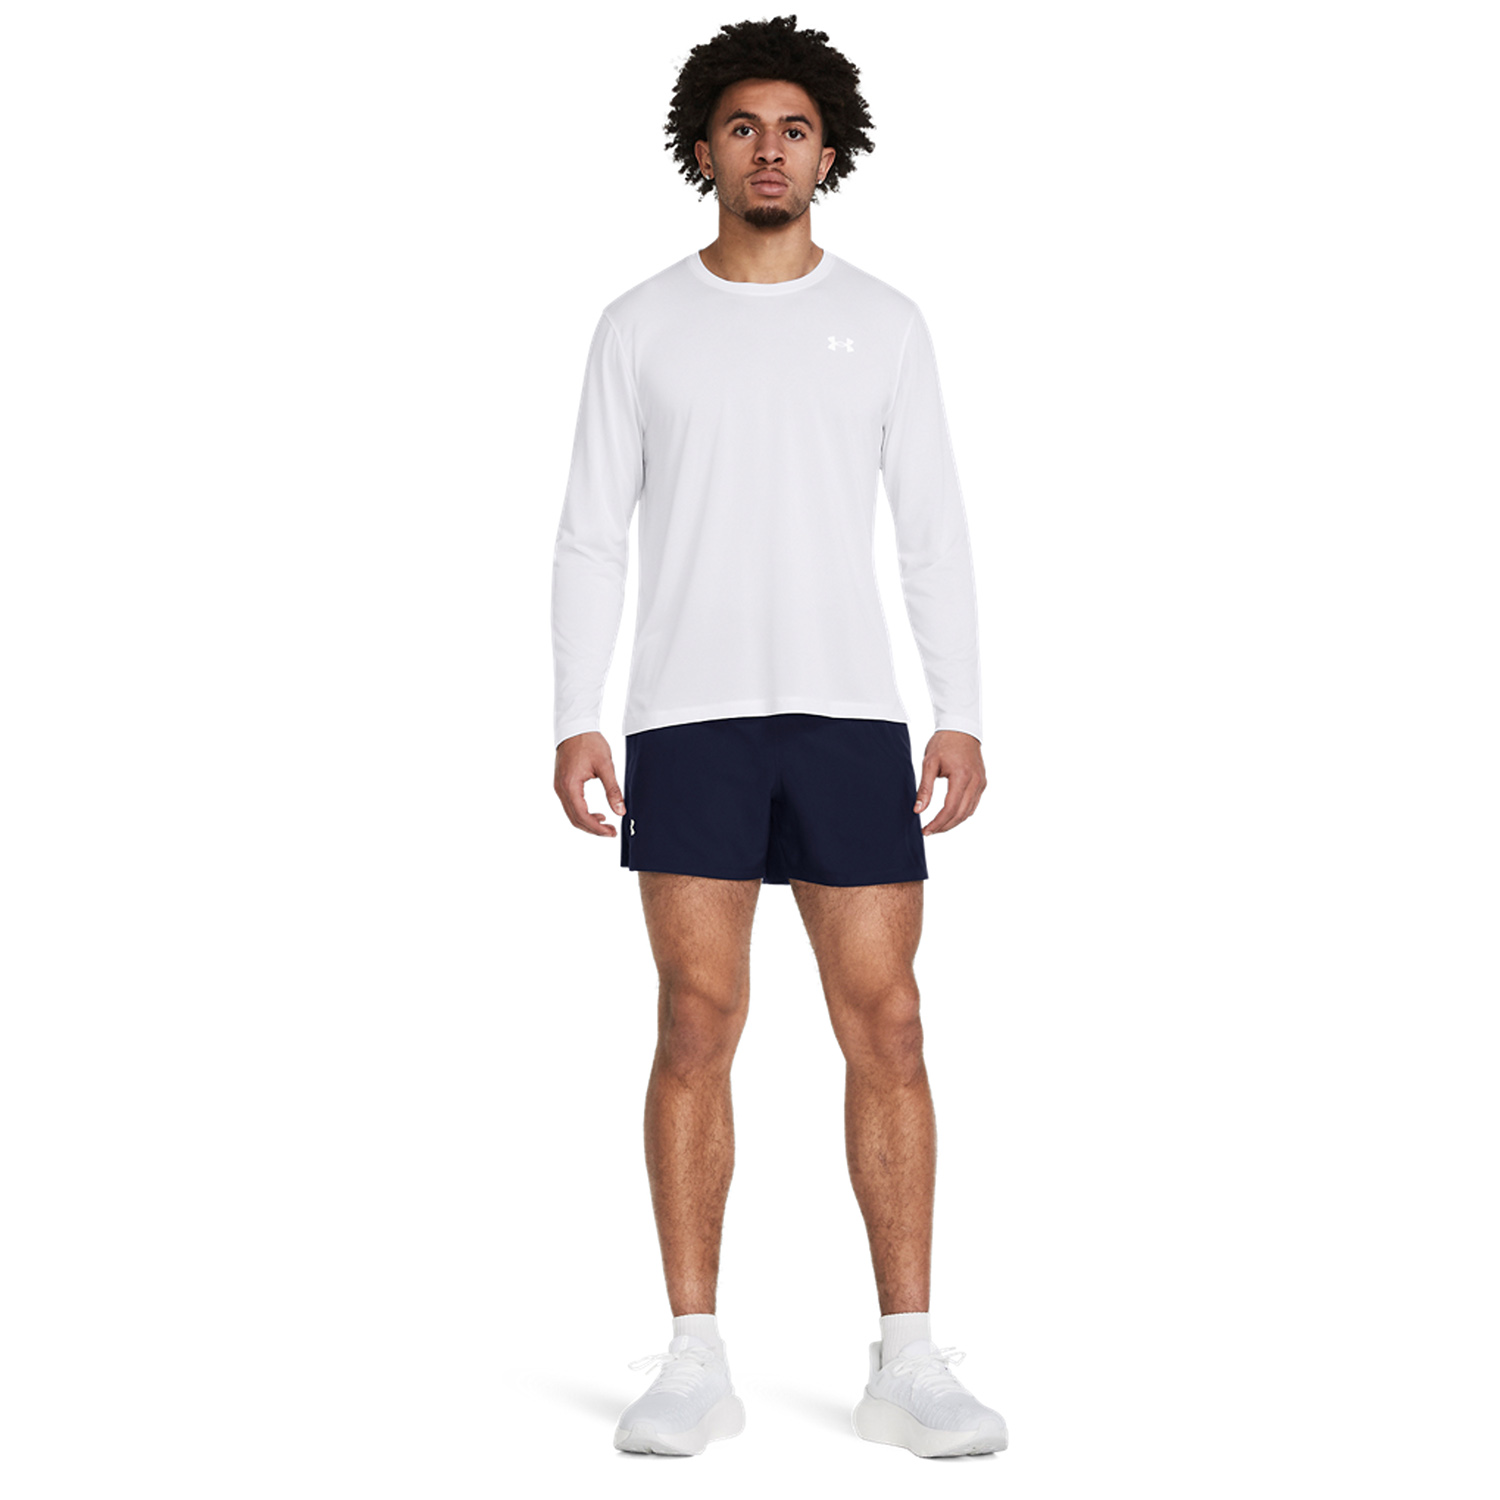 Under Armour Launch 5in Shorts - Midnight Navy/Reflective